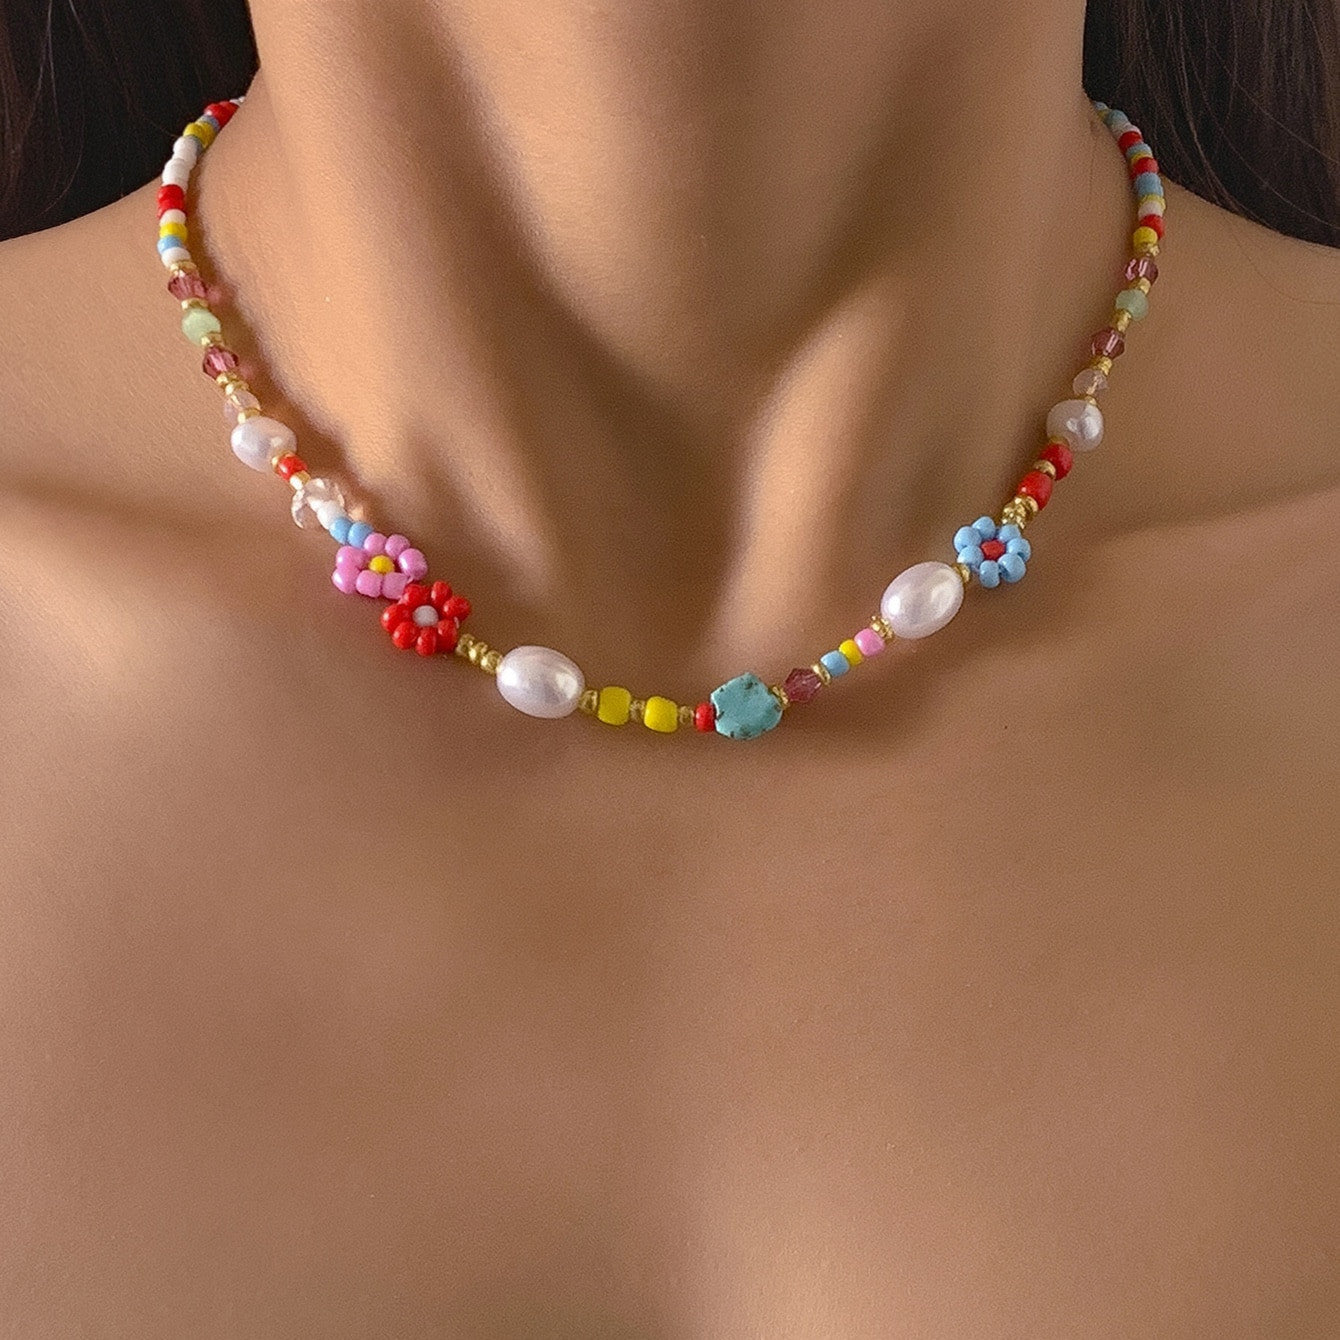 Vintage Flower Decor Beaded Necklace - Handmade Colorful Clavicle Chain Rainbow Seed Beads Imitation Pearl Necklace